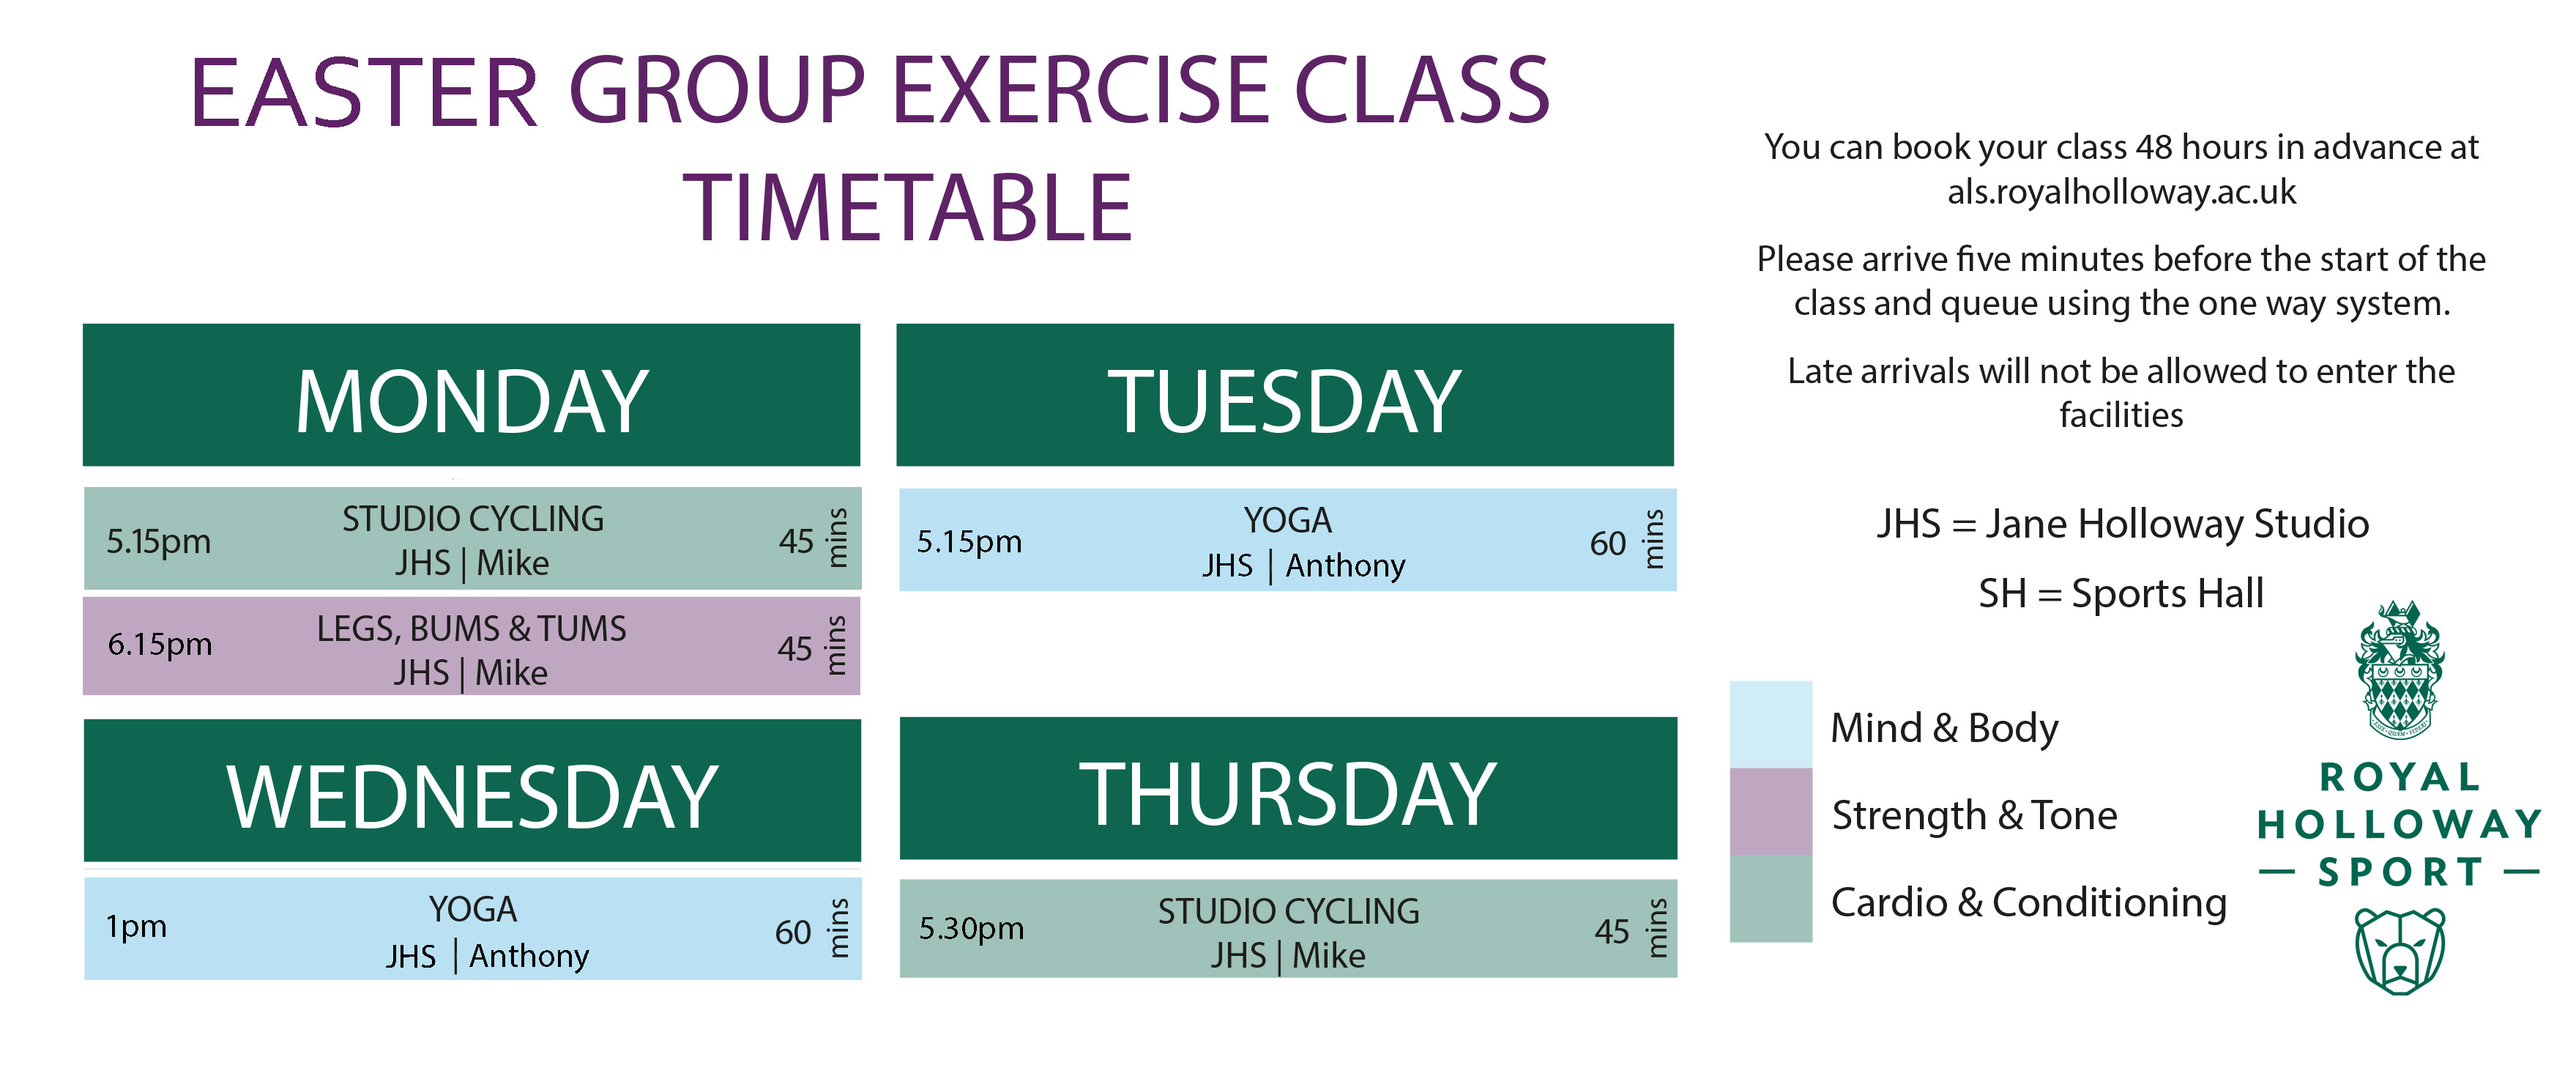 Easter group exercise timetable Royal Holloway Student